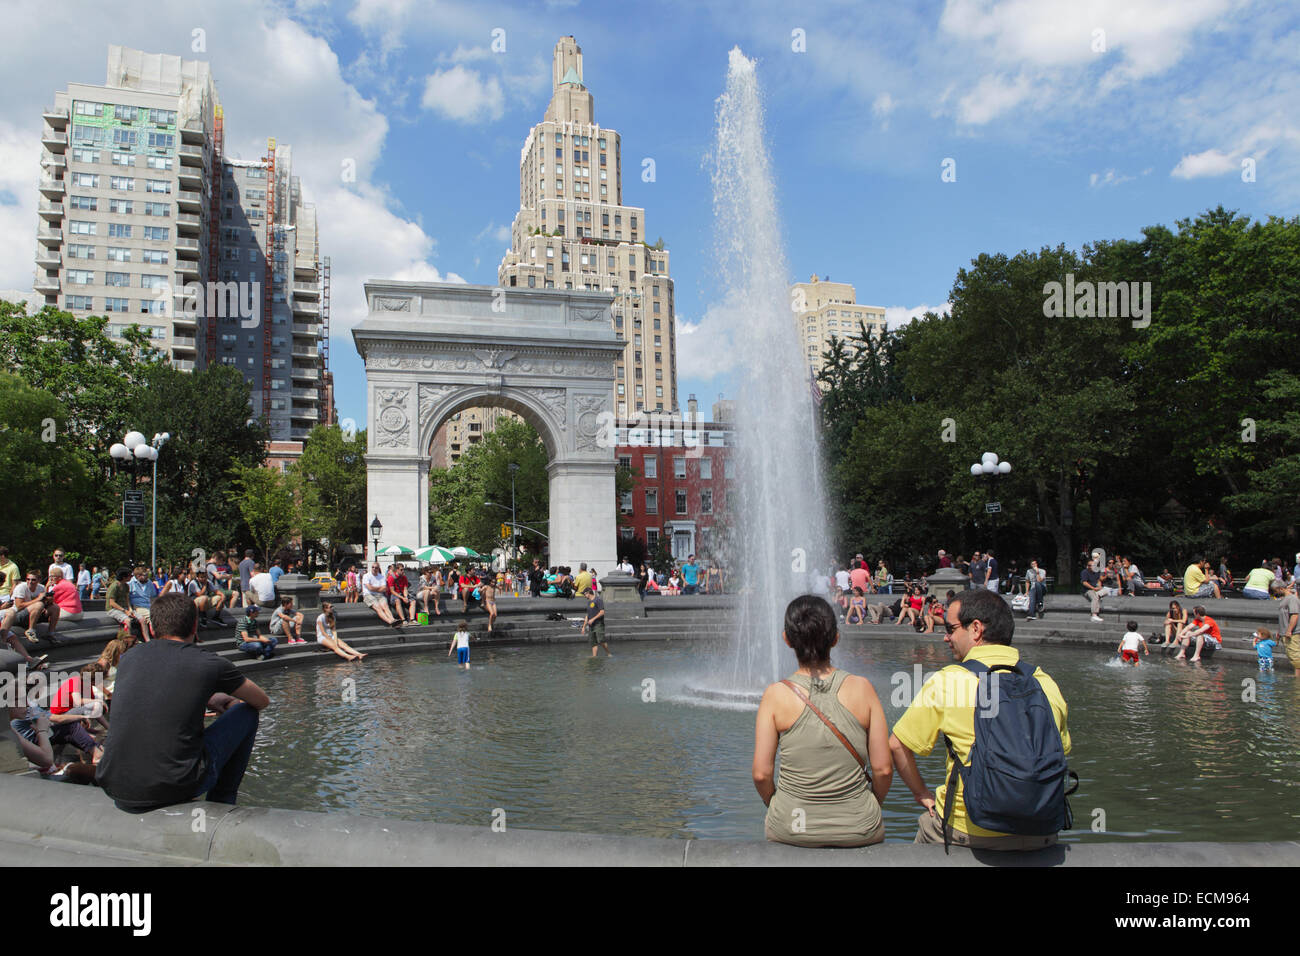 Summer view of Washington Square Park fountain with tourists and students Stock Photo